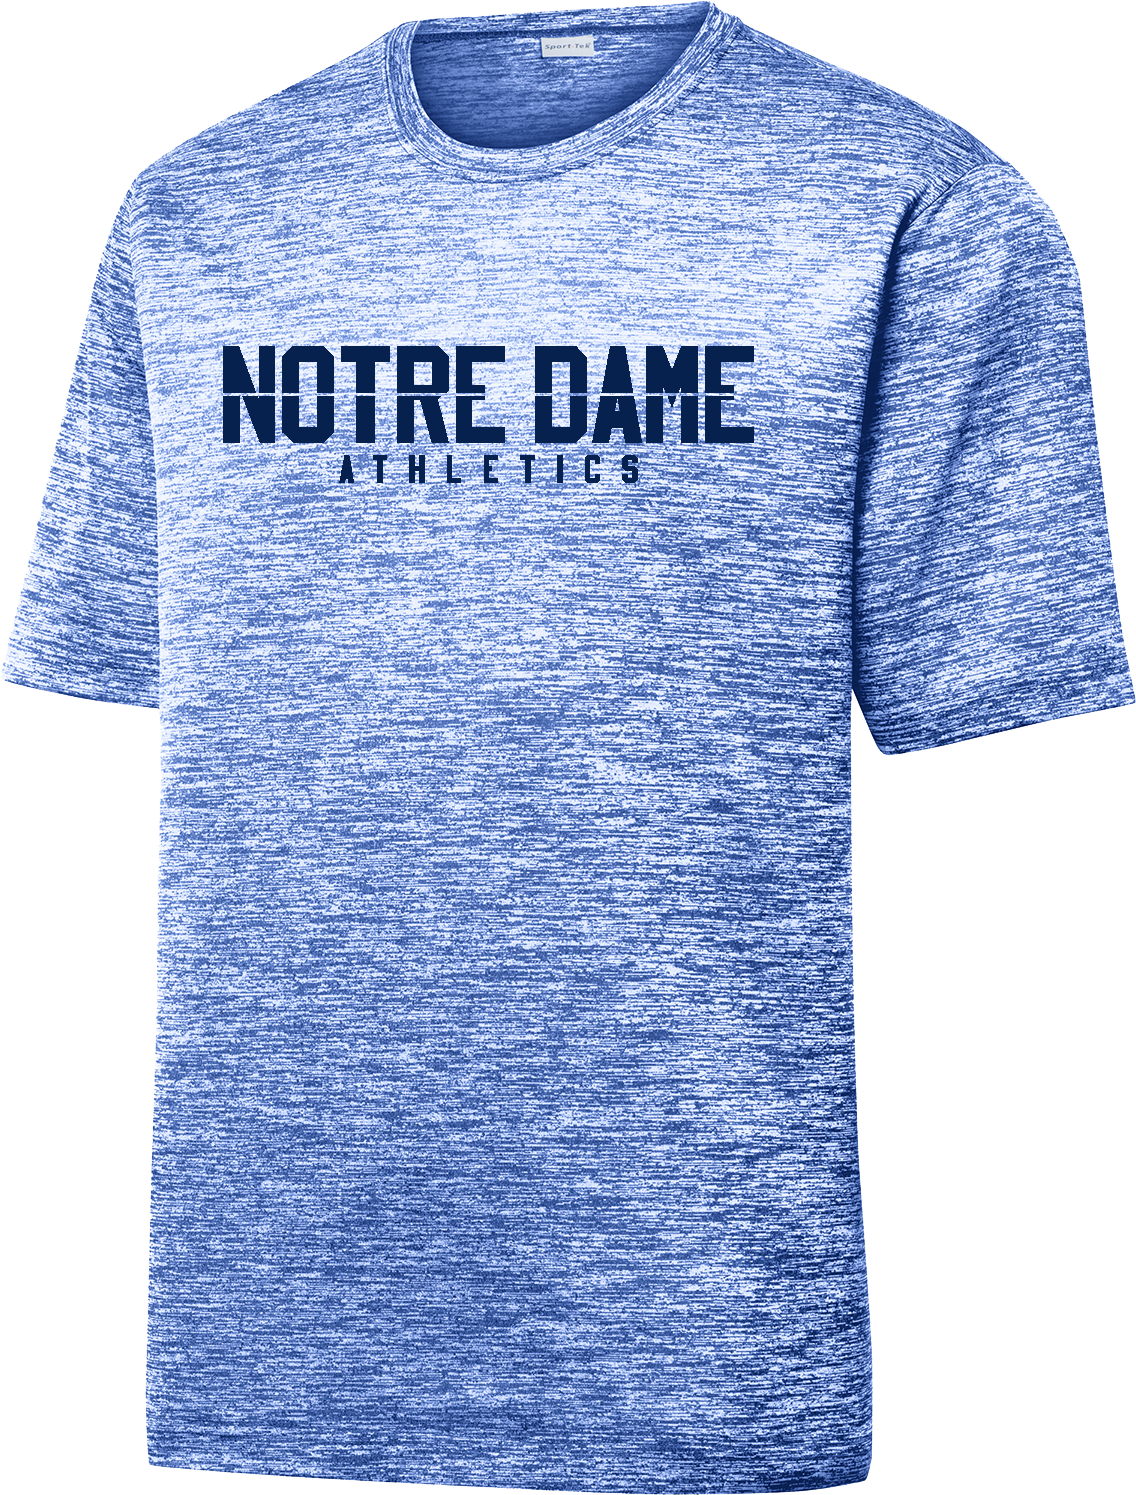  Notre Dame Athletics Performance Heather Tee -TRUE ELECTRIC ROYAL